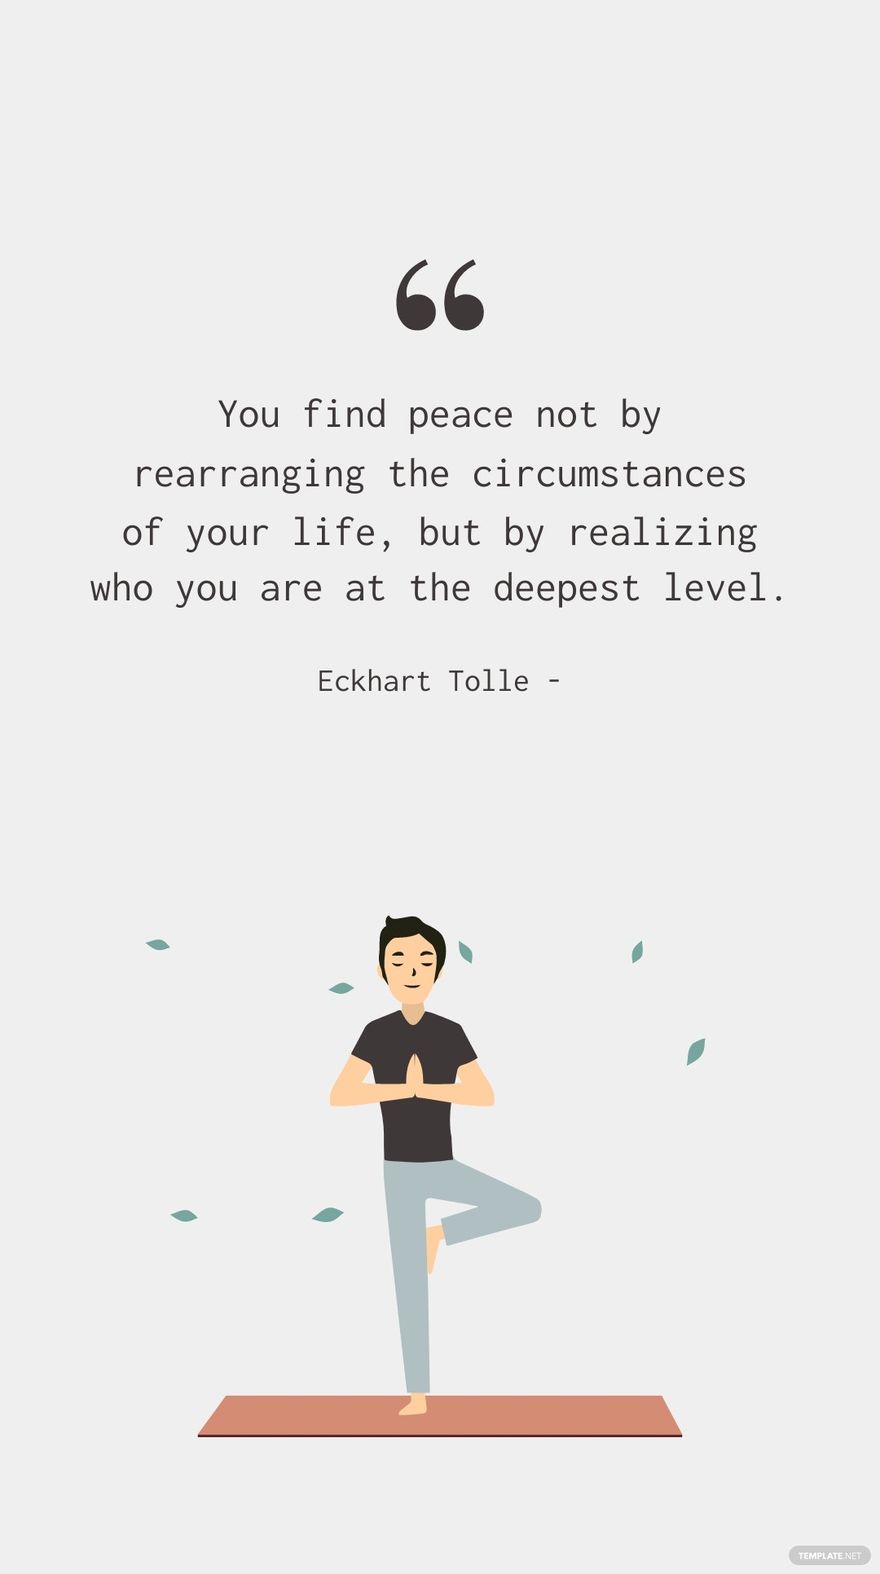 Free Eckhart Tolle - You find peace not by rearranging the circumstances of your life, but by realizing who you are at the deepest level. in JPG